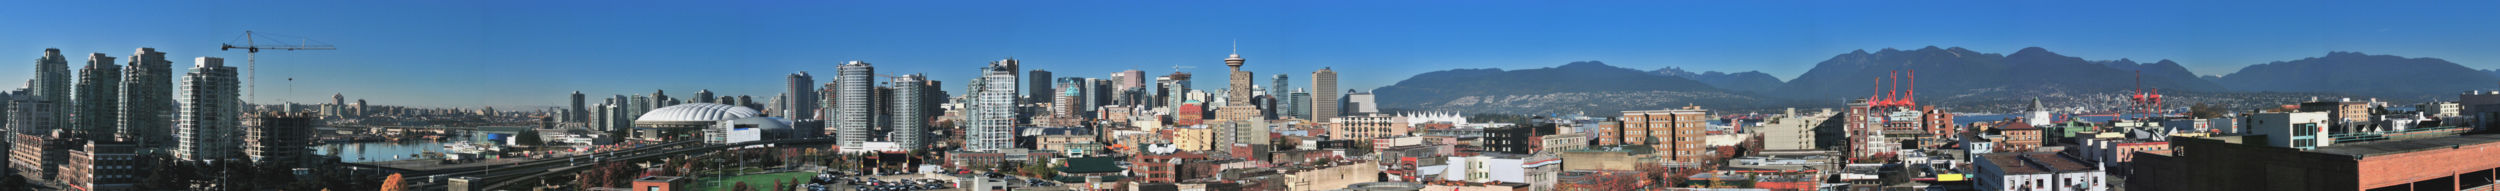 Panorama of Vancouver taken from Chinatown.